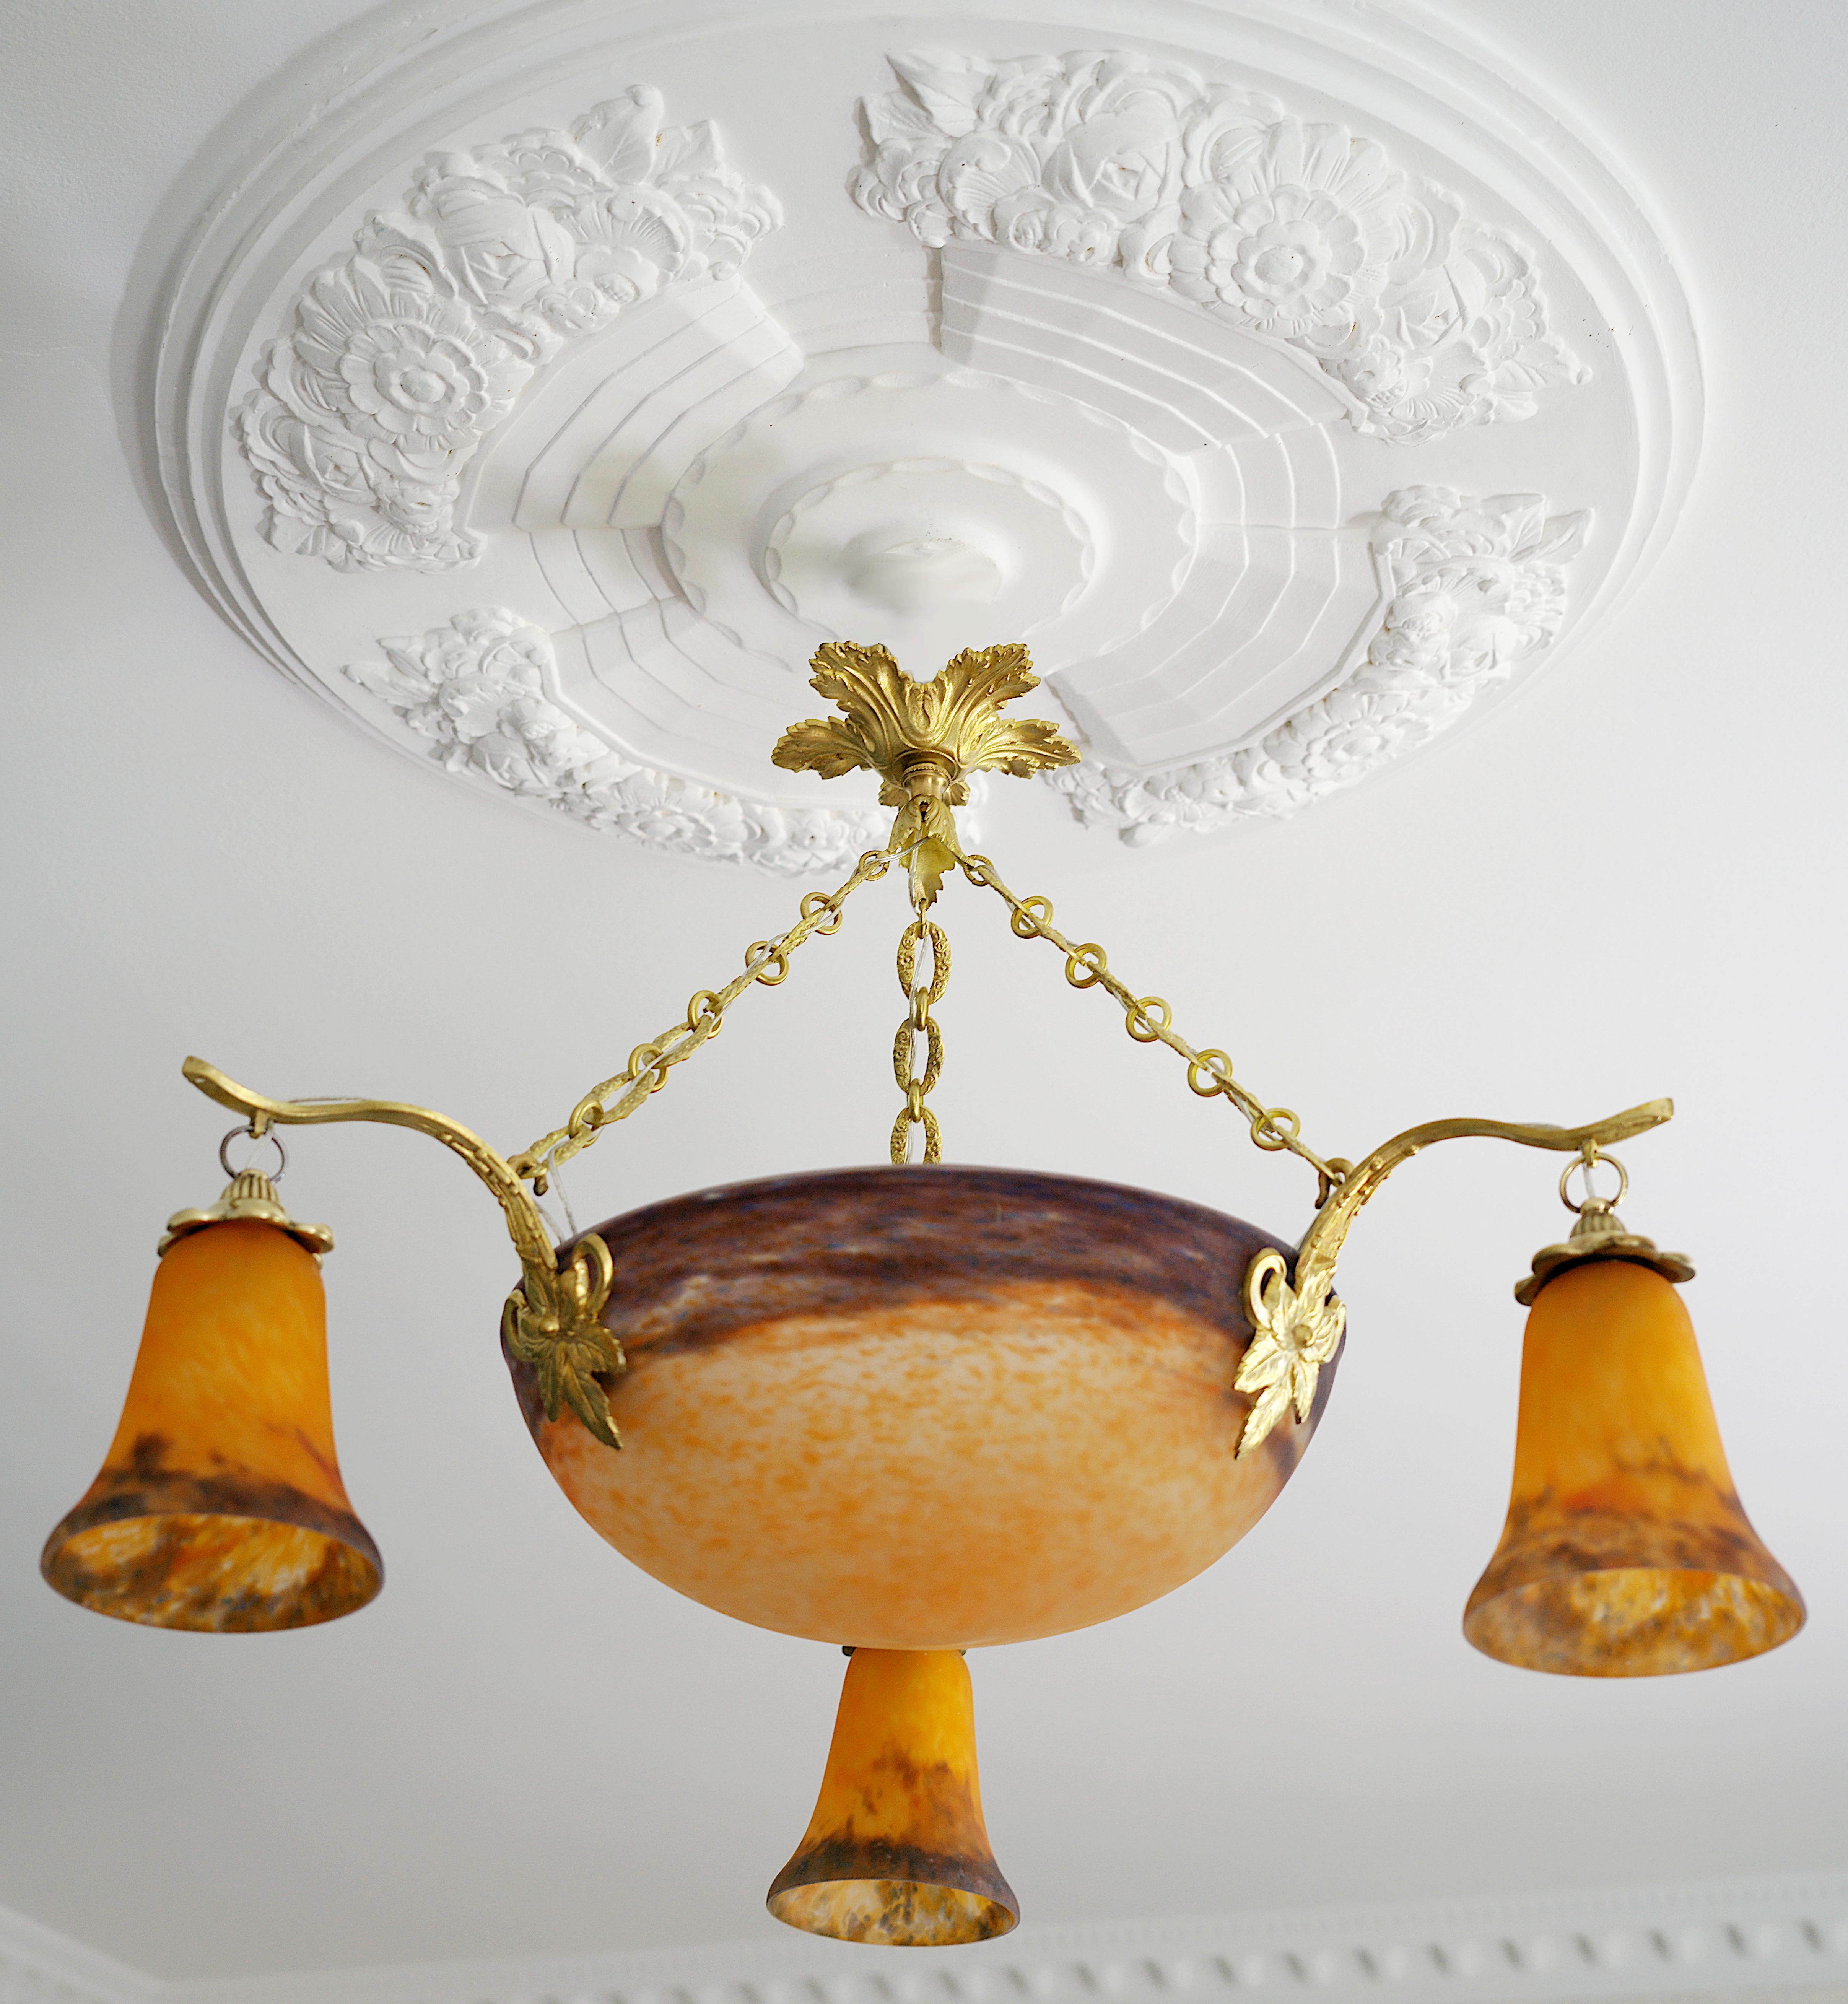 Muller Freres & Petitot French Art Deco Chandelier, 1920s For Sale 1